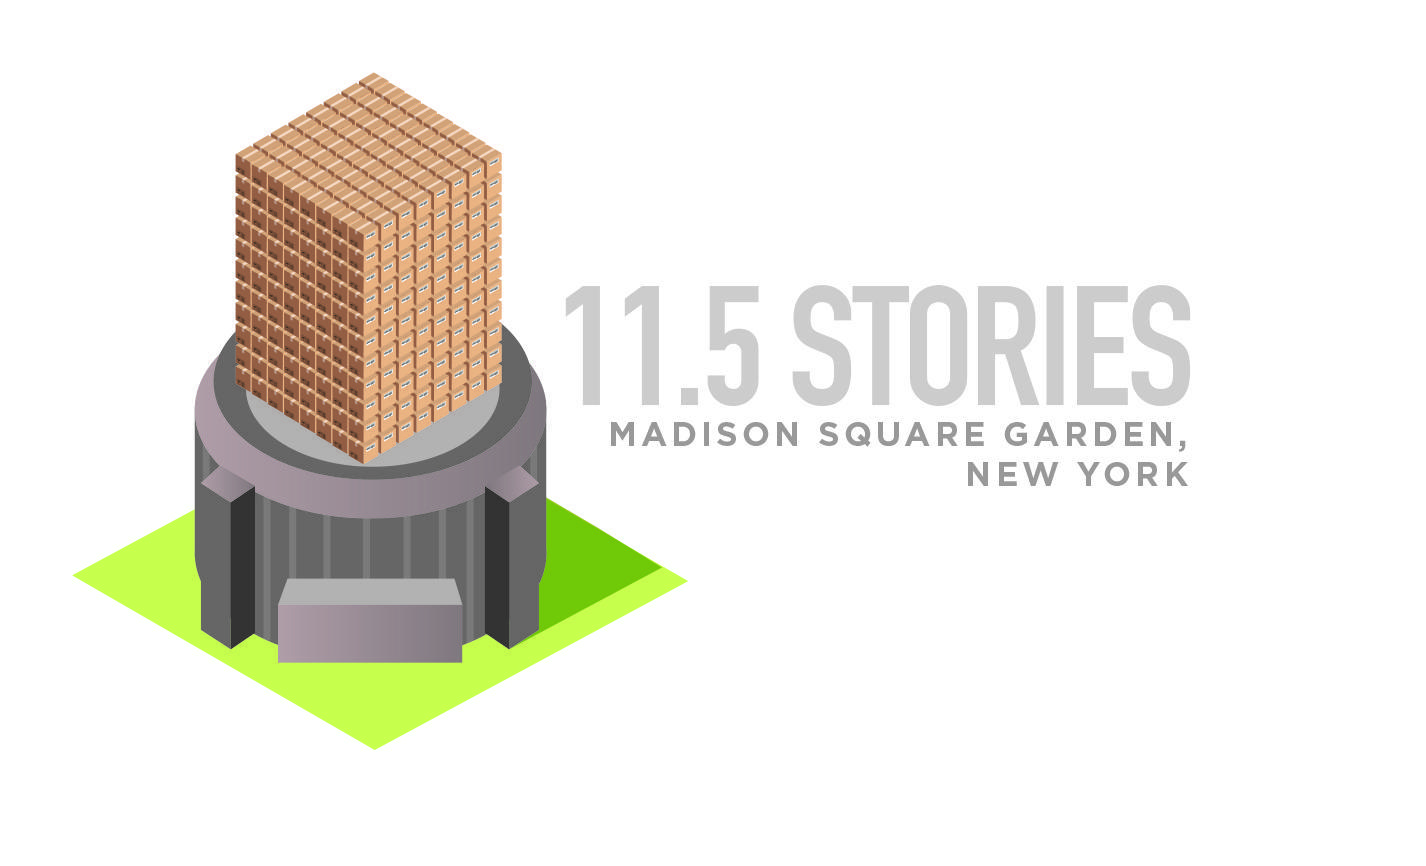 An image showing a 11.5-story tall stack of boxes filling Madison Square Garden, New York.